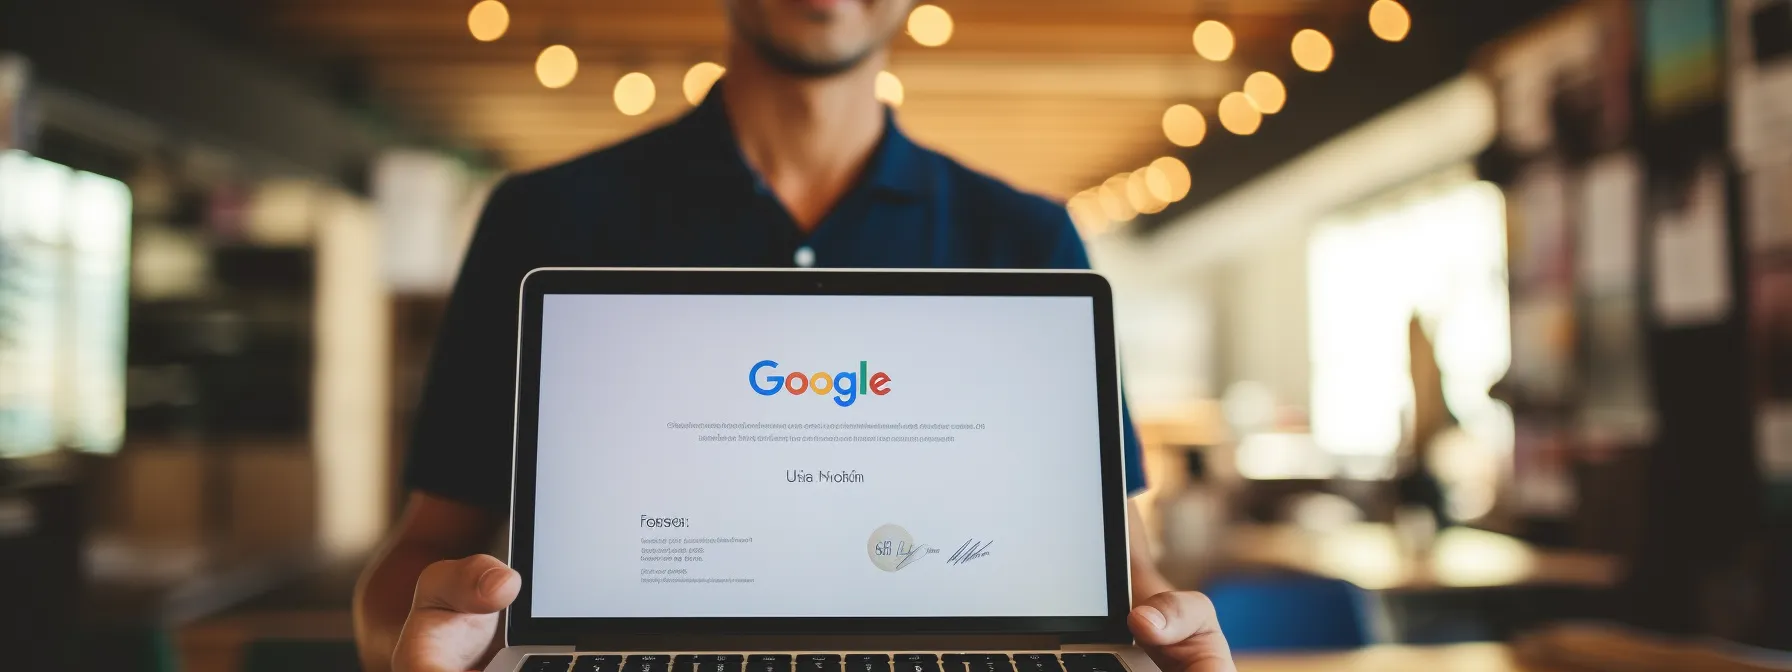 a person holding up a google seo certification with a laptop and digital marketing tools in the background.